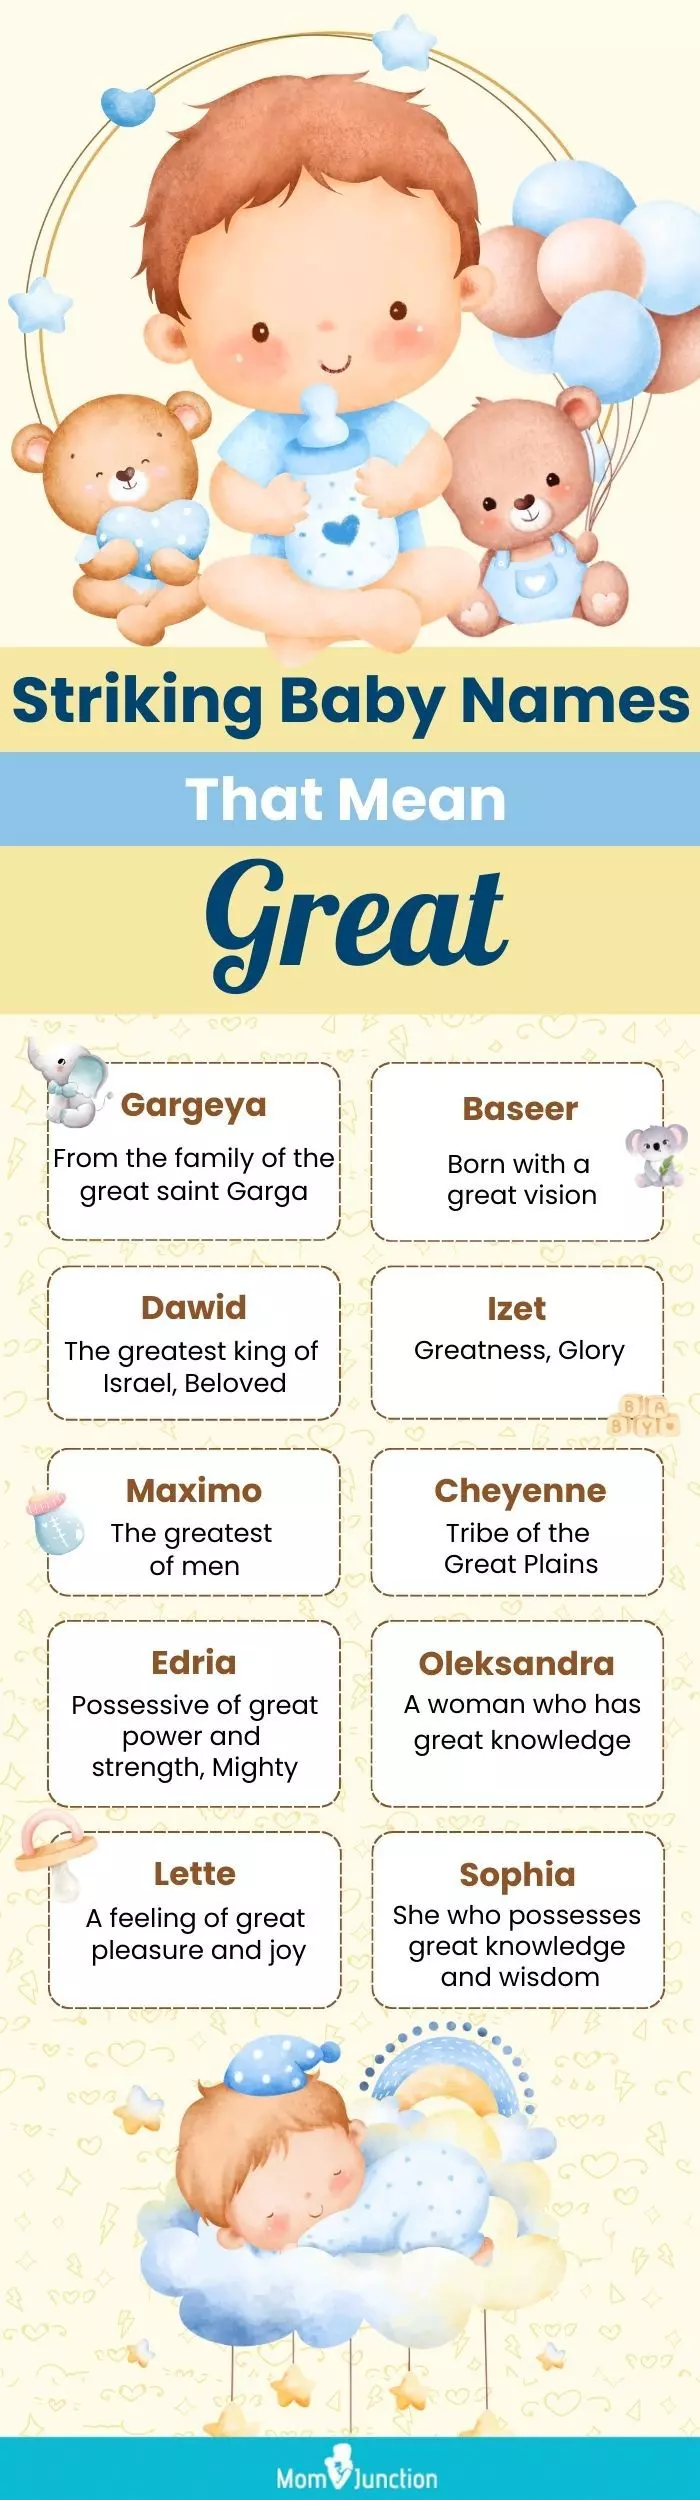 striking baby names that mean great (infographic)